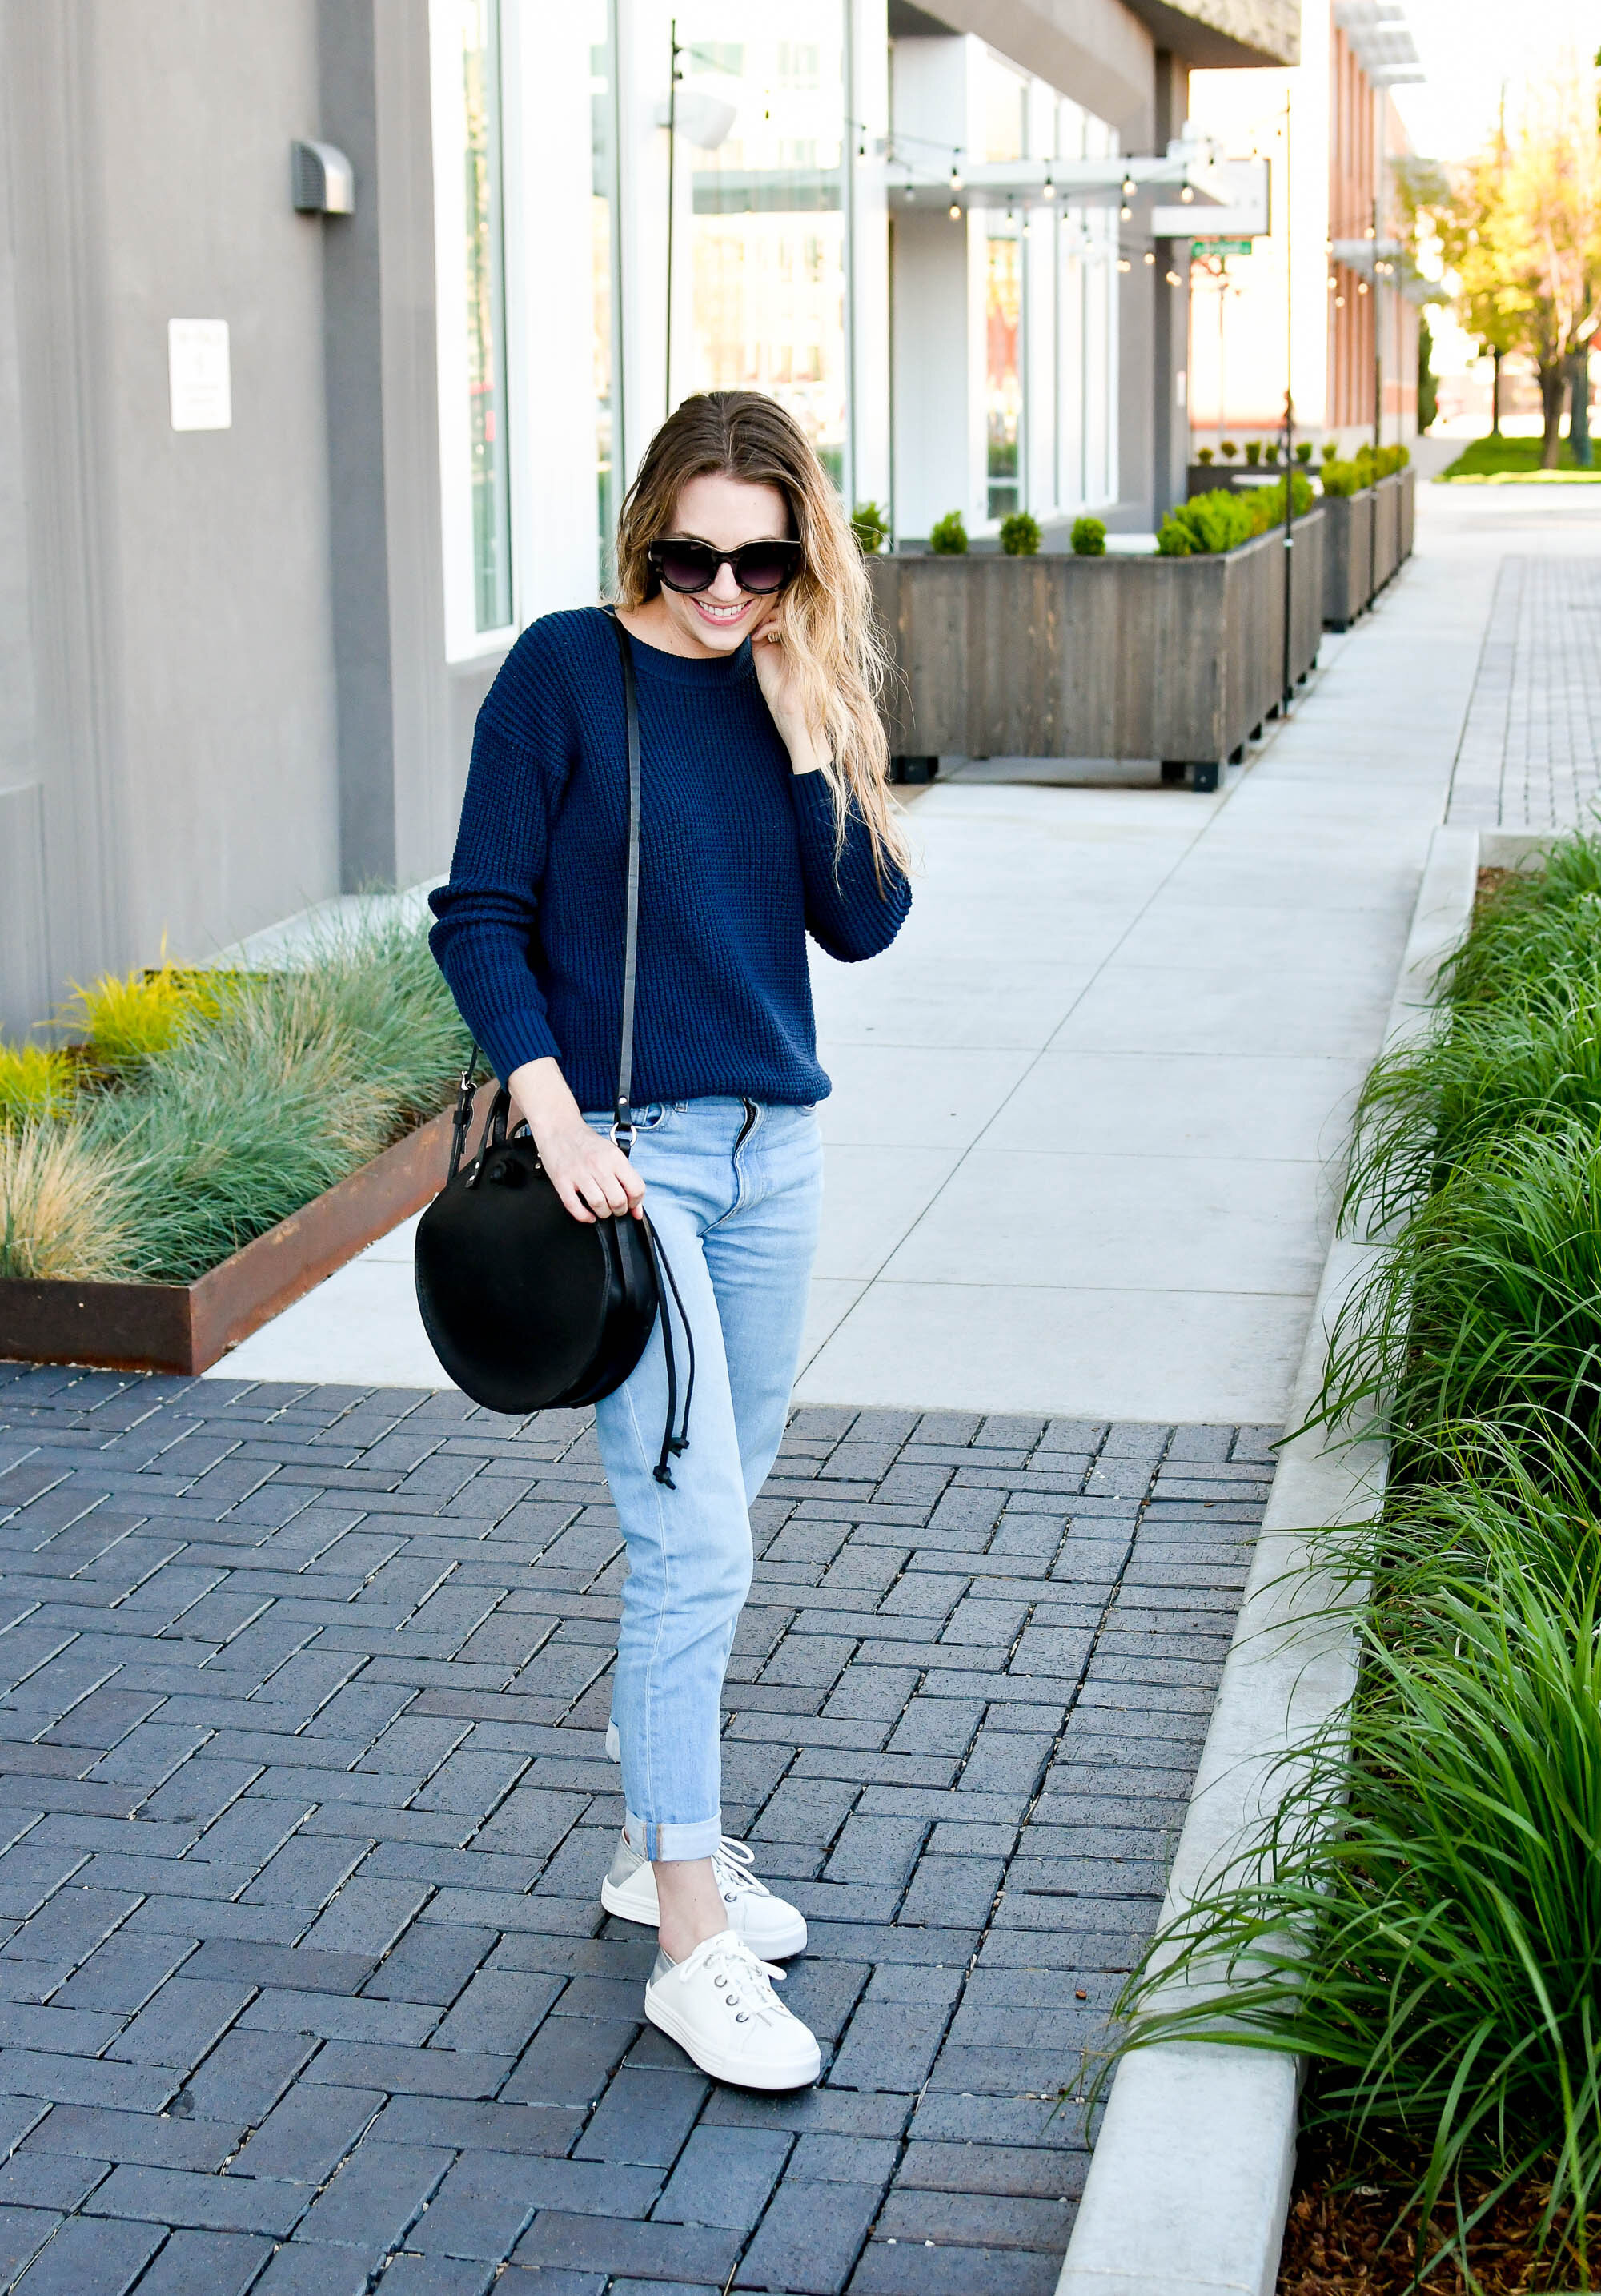 Favorite outfit: Spring sneaker style — Cotton Cashmere Cat Hair